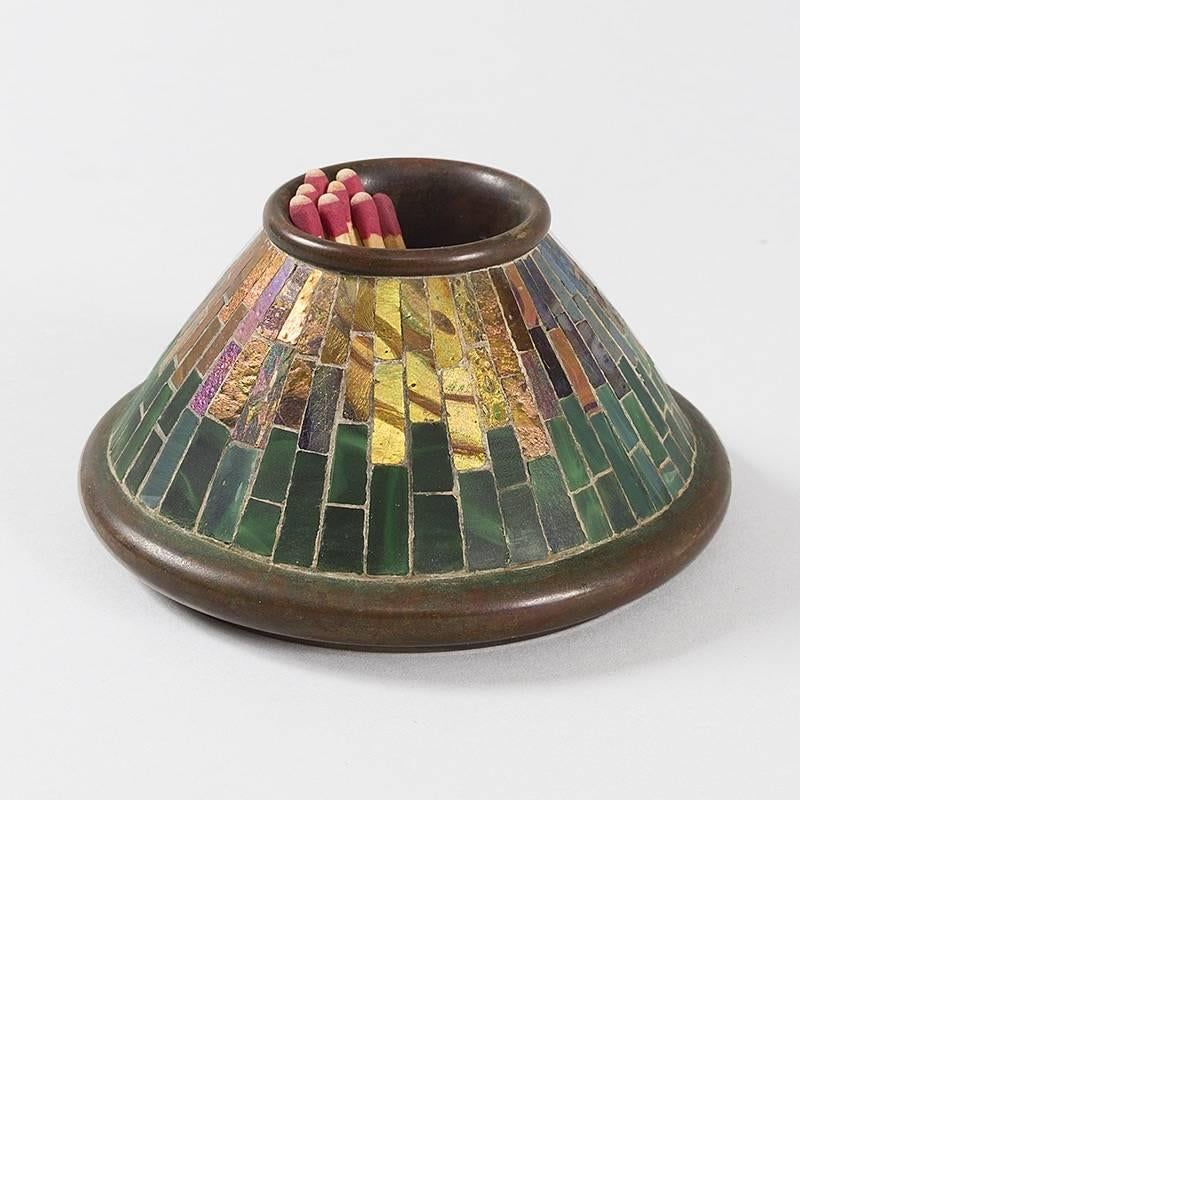 A Tiffany Studios New York Art Nouveau mosaic match holder. The item features vertical panels of mosaic iridescent glass in blues, greens, pinks and yellows over a patinated bronze body, circa 1900

This item is pictured in: Tiffany Desk Sets, by